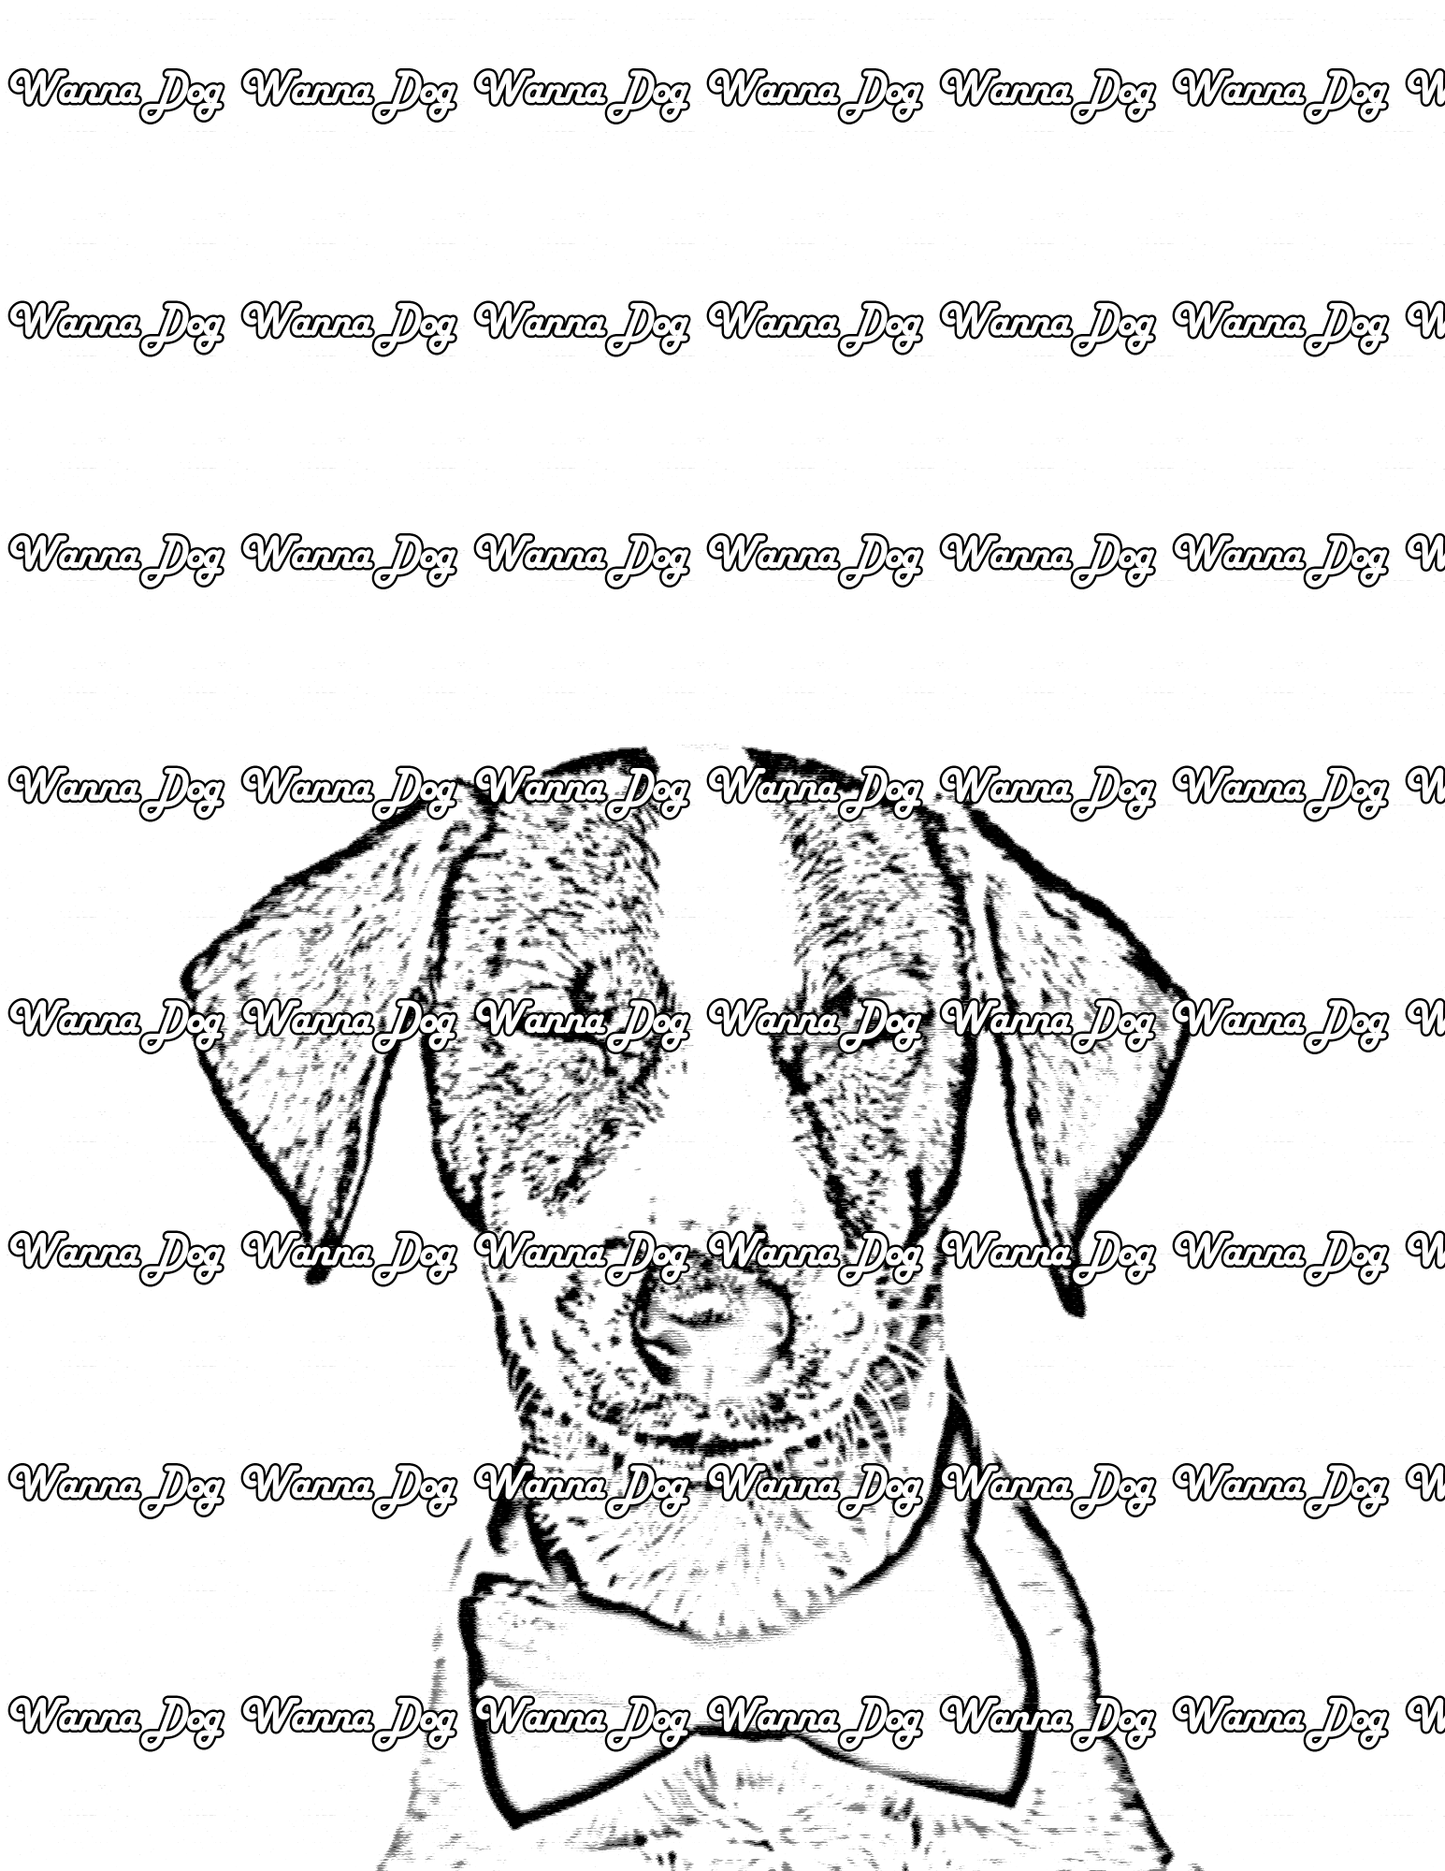 Jack Russell Terrier Coloring Page of a Jack Russell Terrier wearing a bowtie